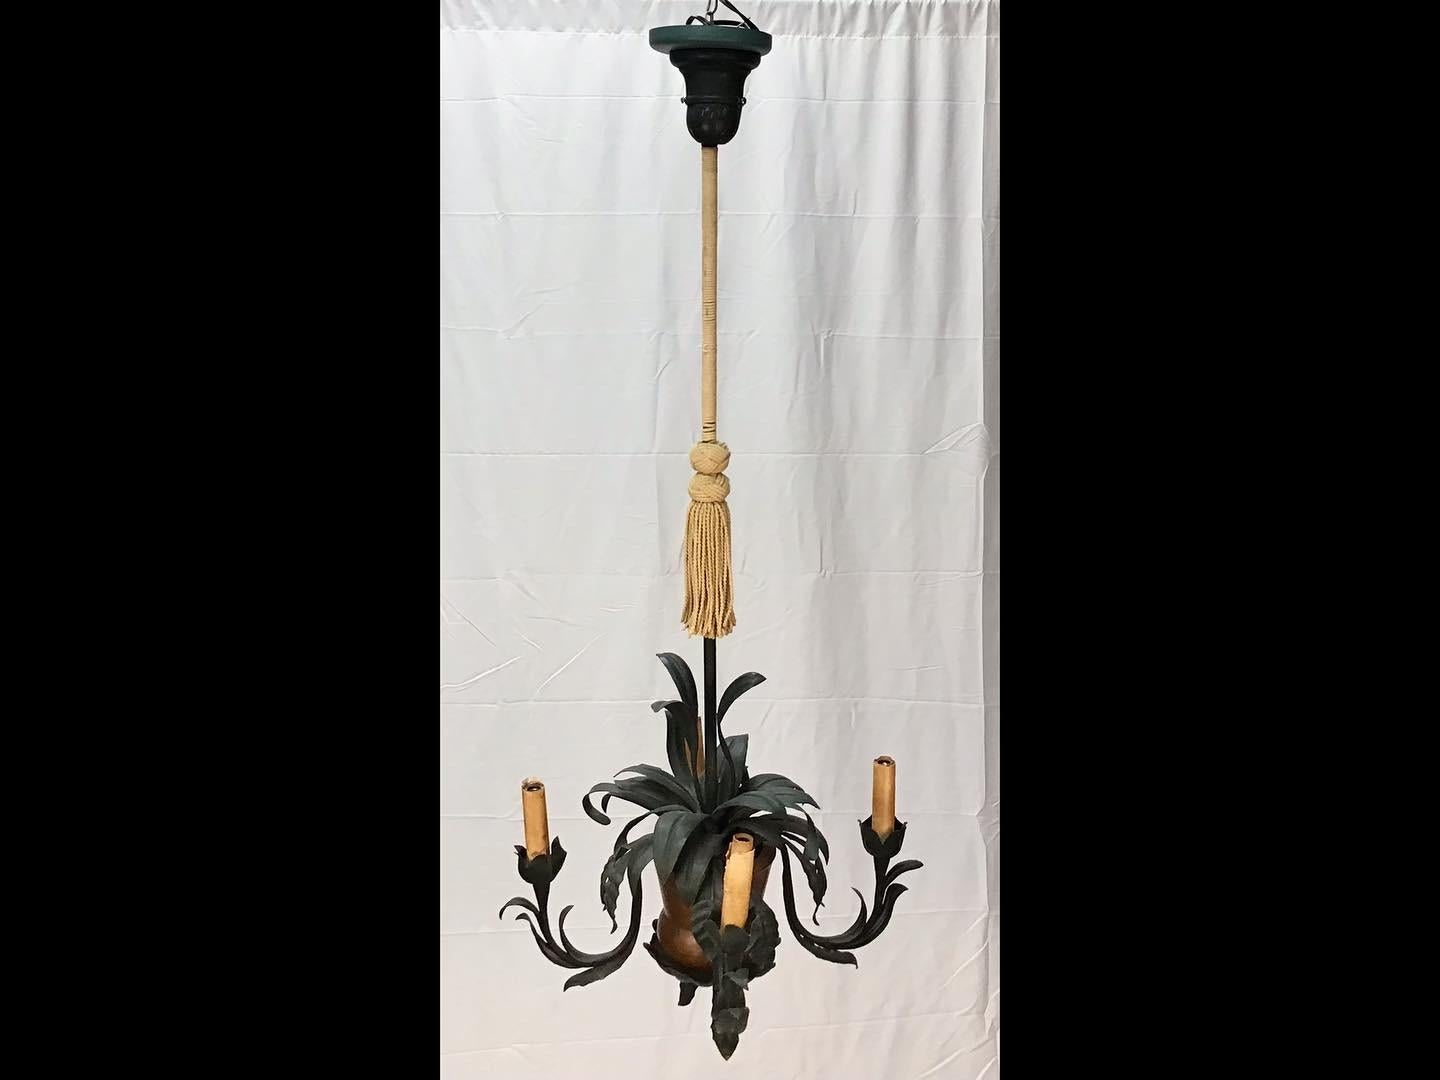 Eye-catching hand-hammered copper basket with tole palm frond leaves palm tree ceiling light fixture. A copper basket supported by a long metal pole wrapped with a tassel. The basket with tole palm fronds and four arms with lights. A truly unique